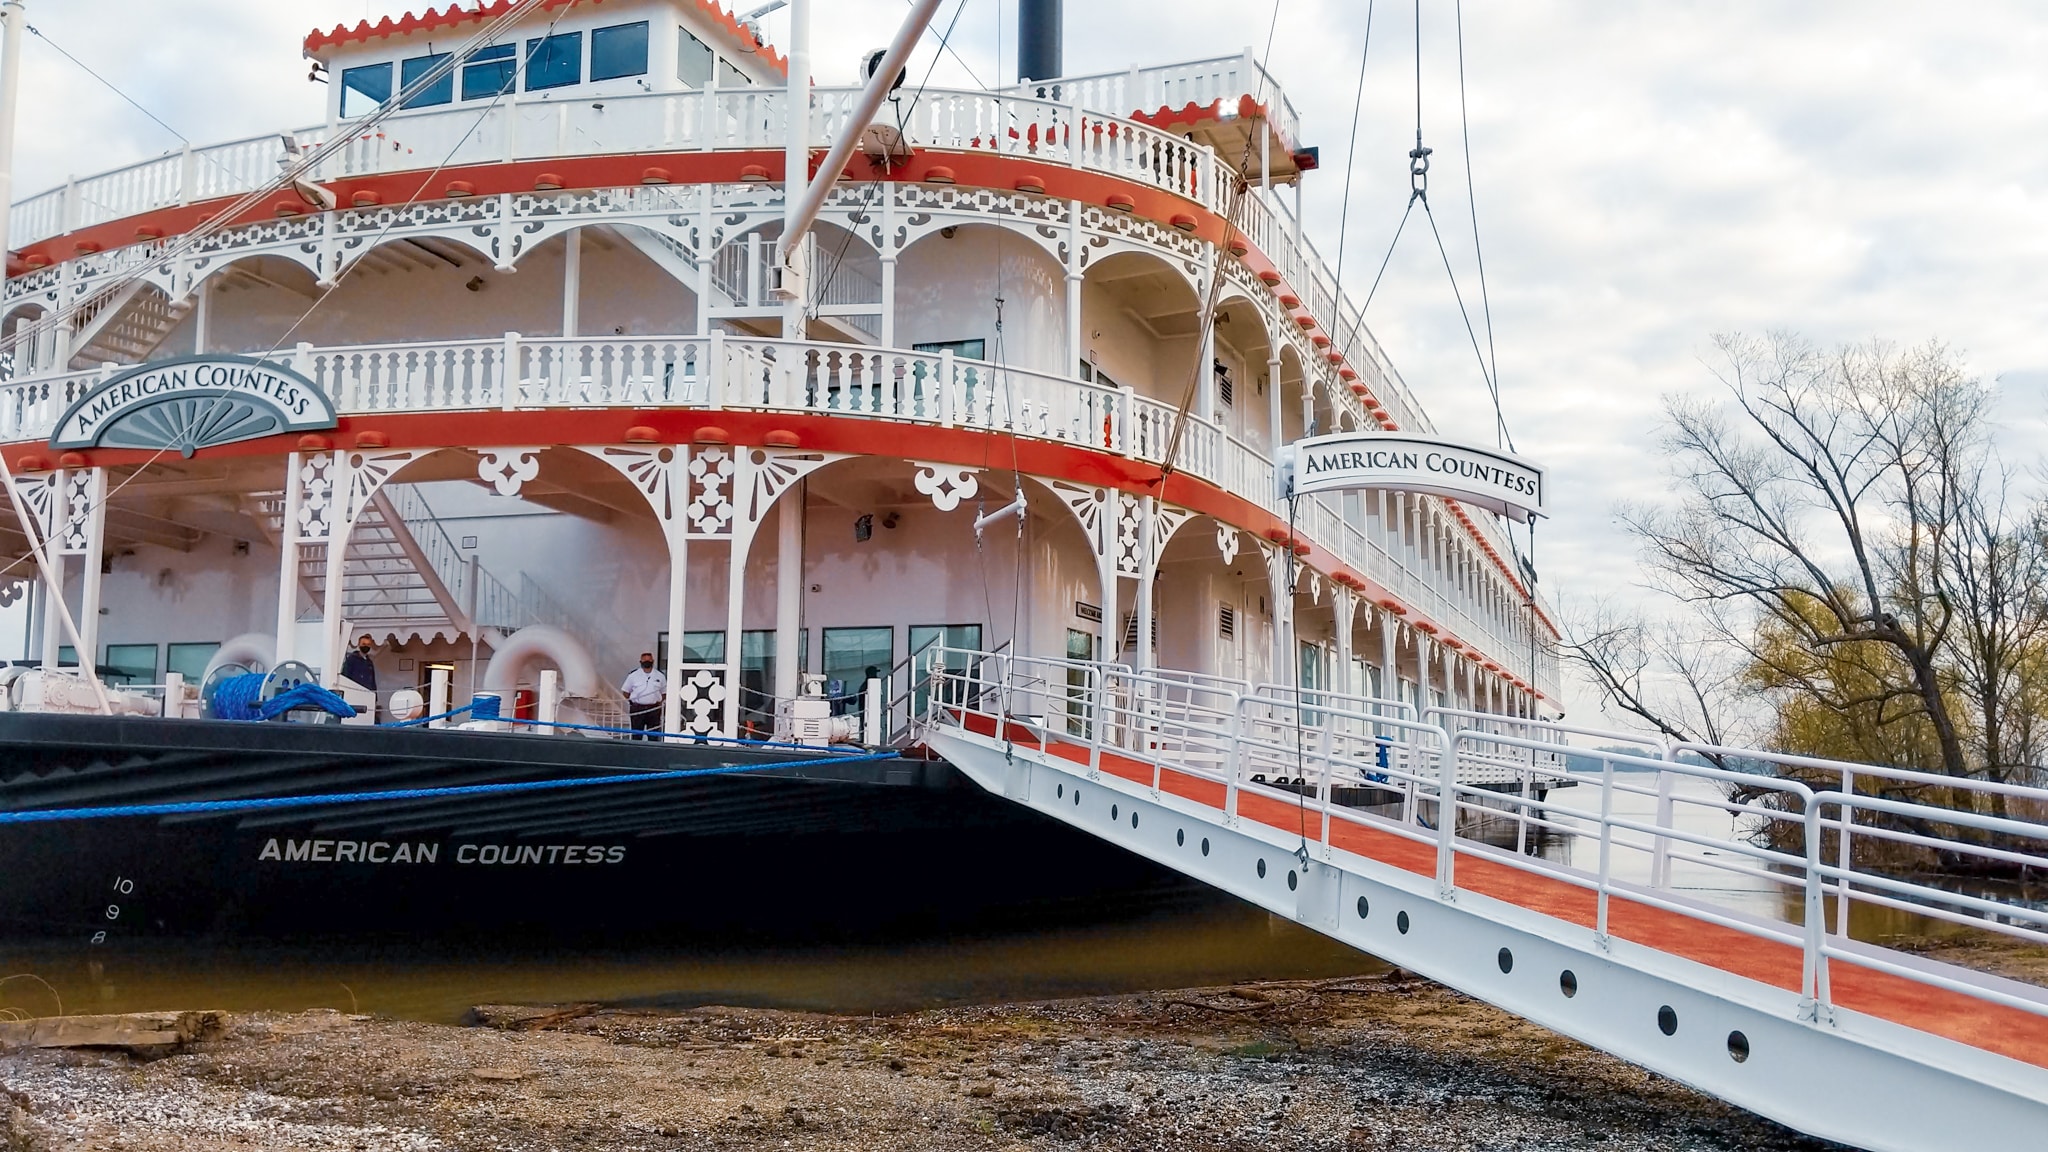 4 Reasons You’ll Love a Mississippi River Cruise on American Countess